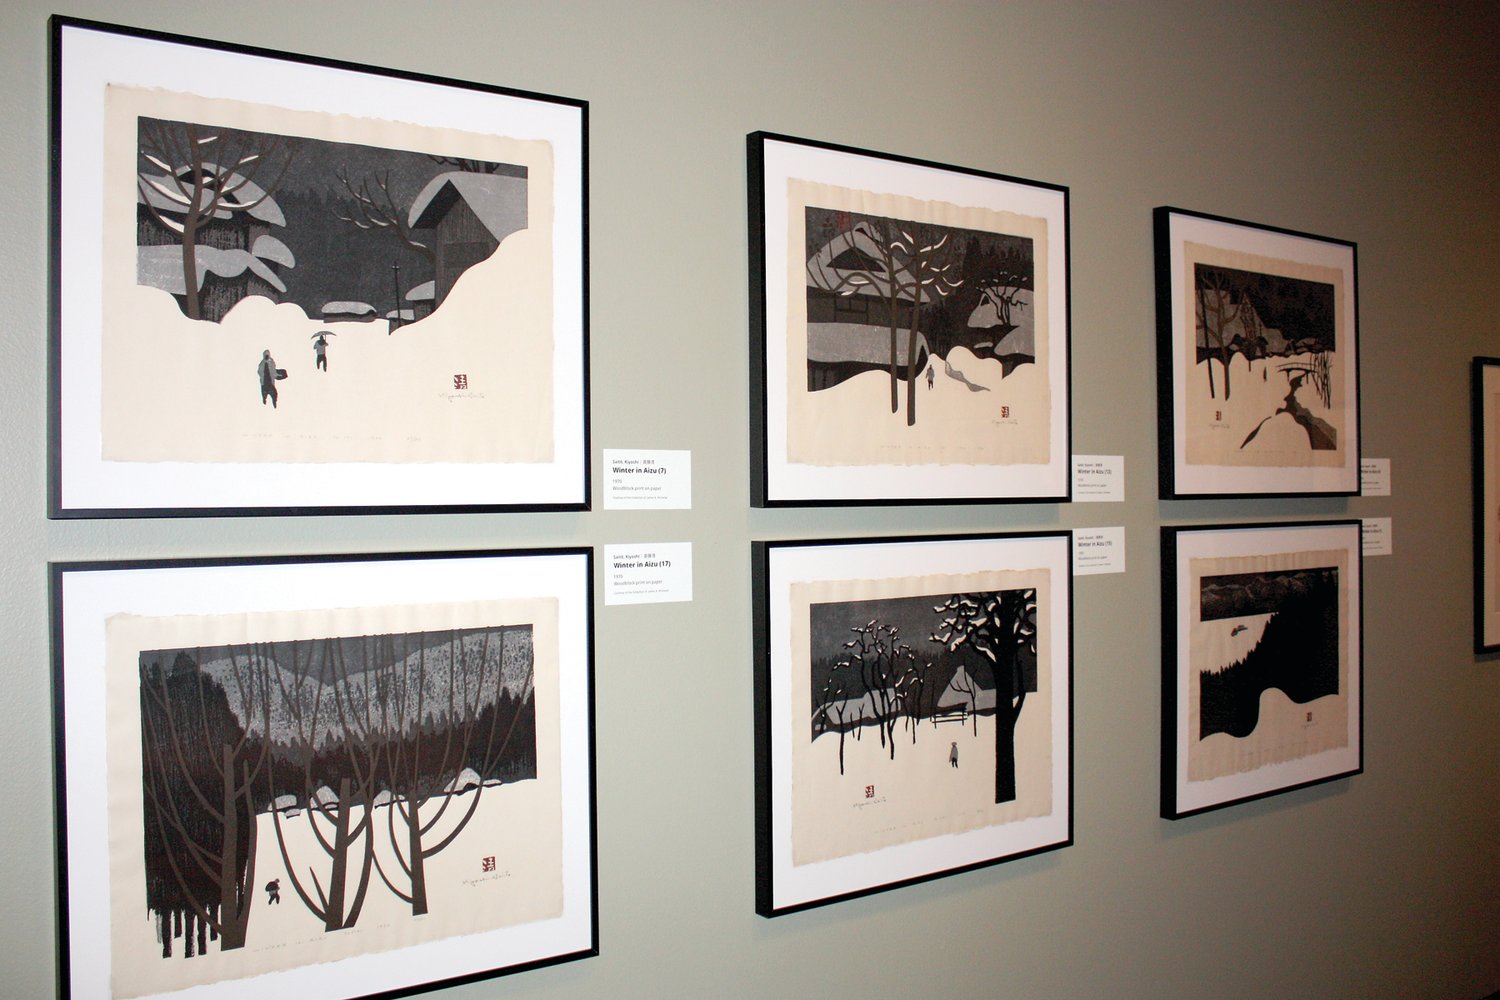 On display at the Michener Art Museum are six of  the 115 prints from Saito Kiyoshi’s “Winter in Aizu” series, depicting the winter landscape in the region where he was born.